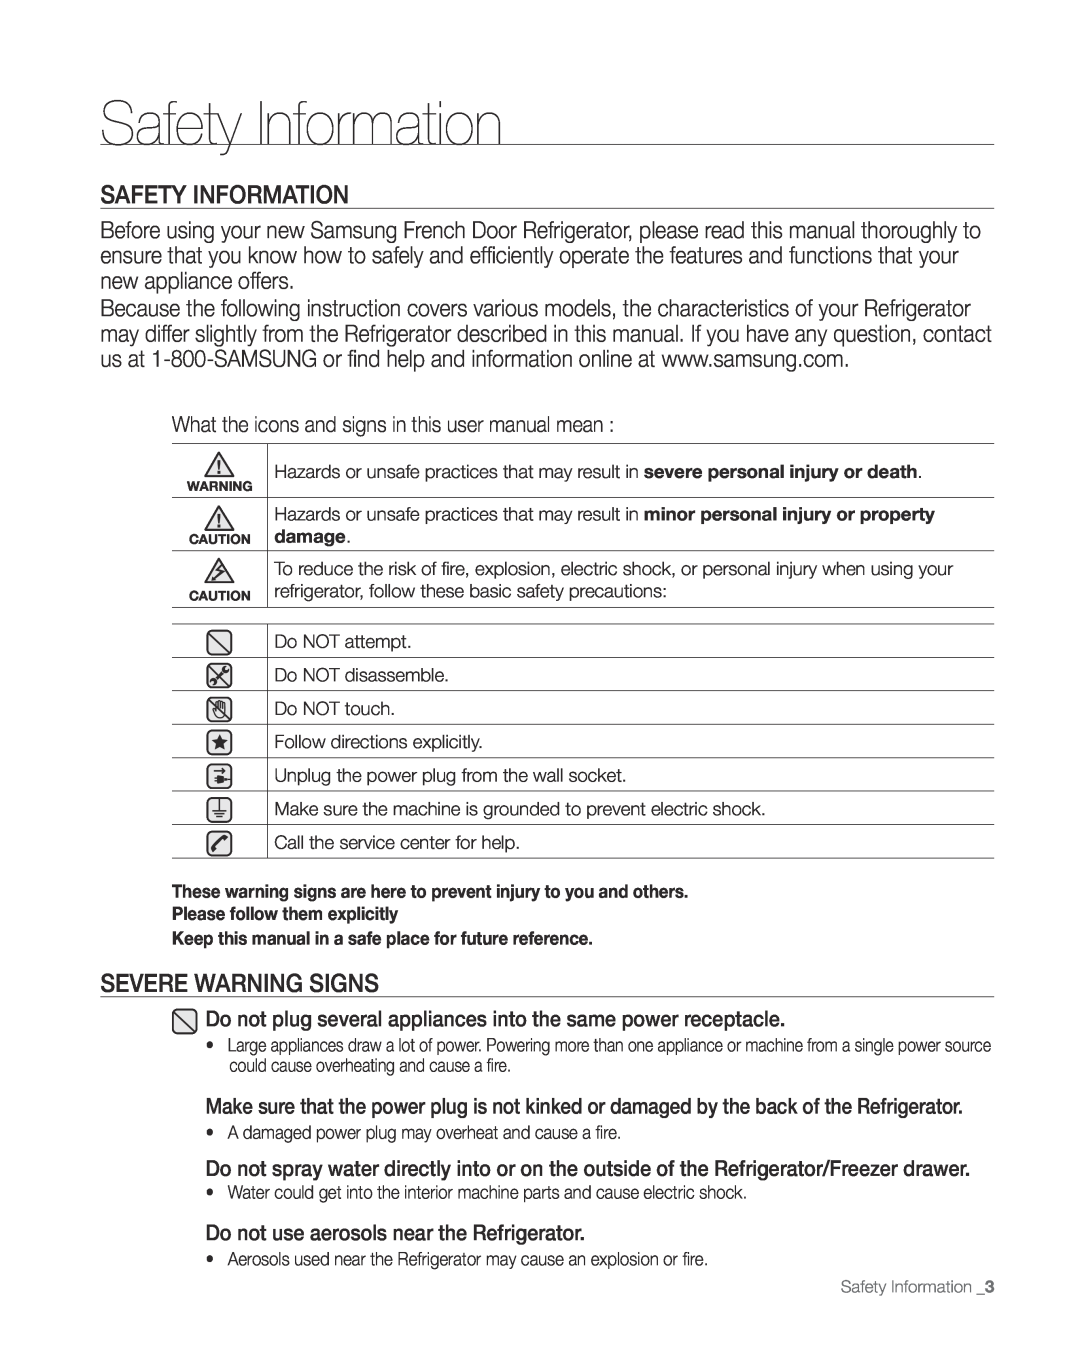 Sears RFG297AA Safety Information, Severe Warning Signs, Do not plug several appliances into the same power receptacle 